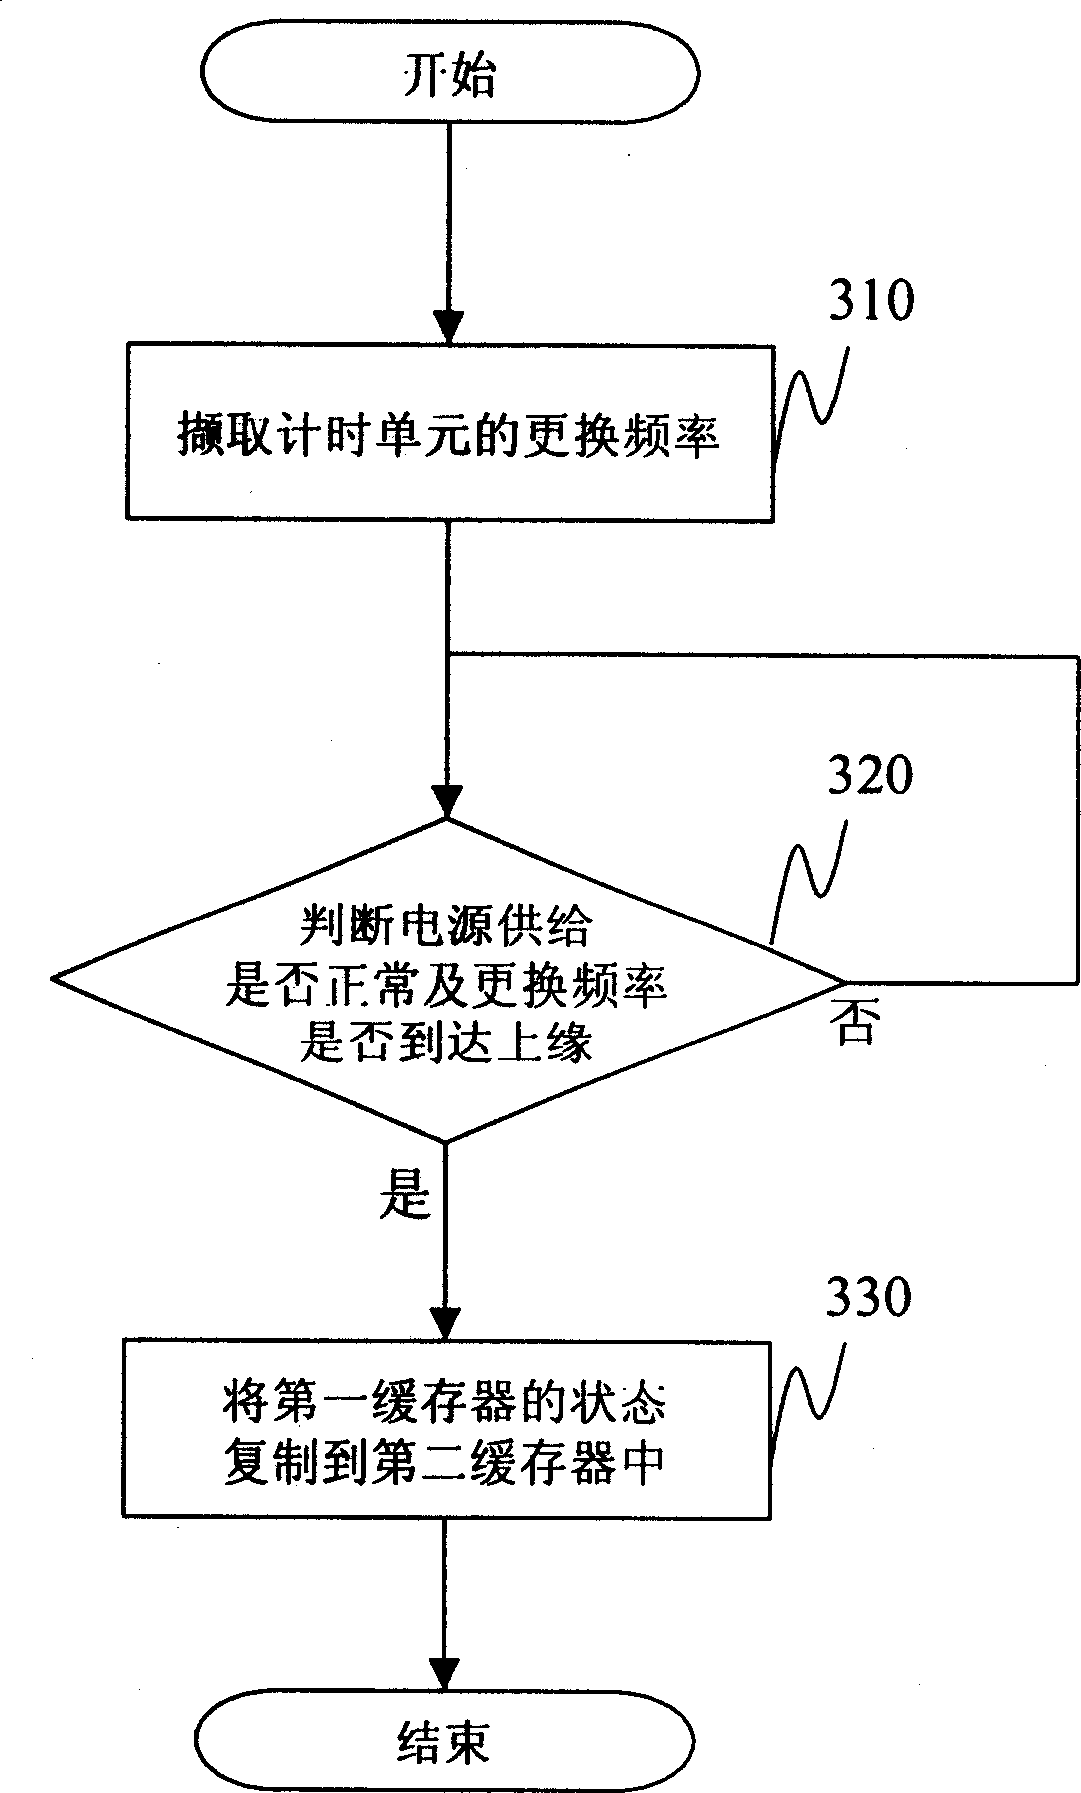 Equipment for display information treatment system state and its method